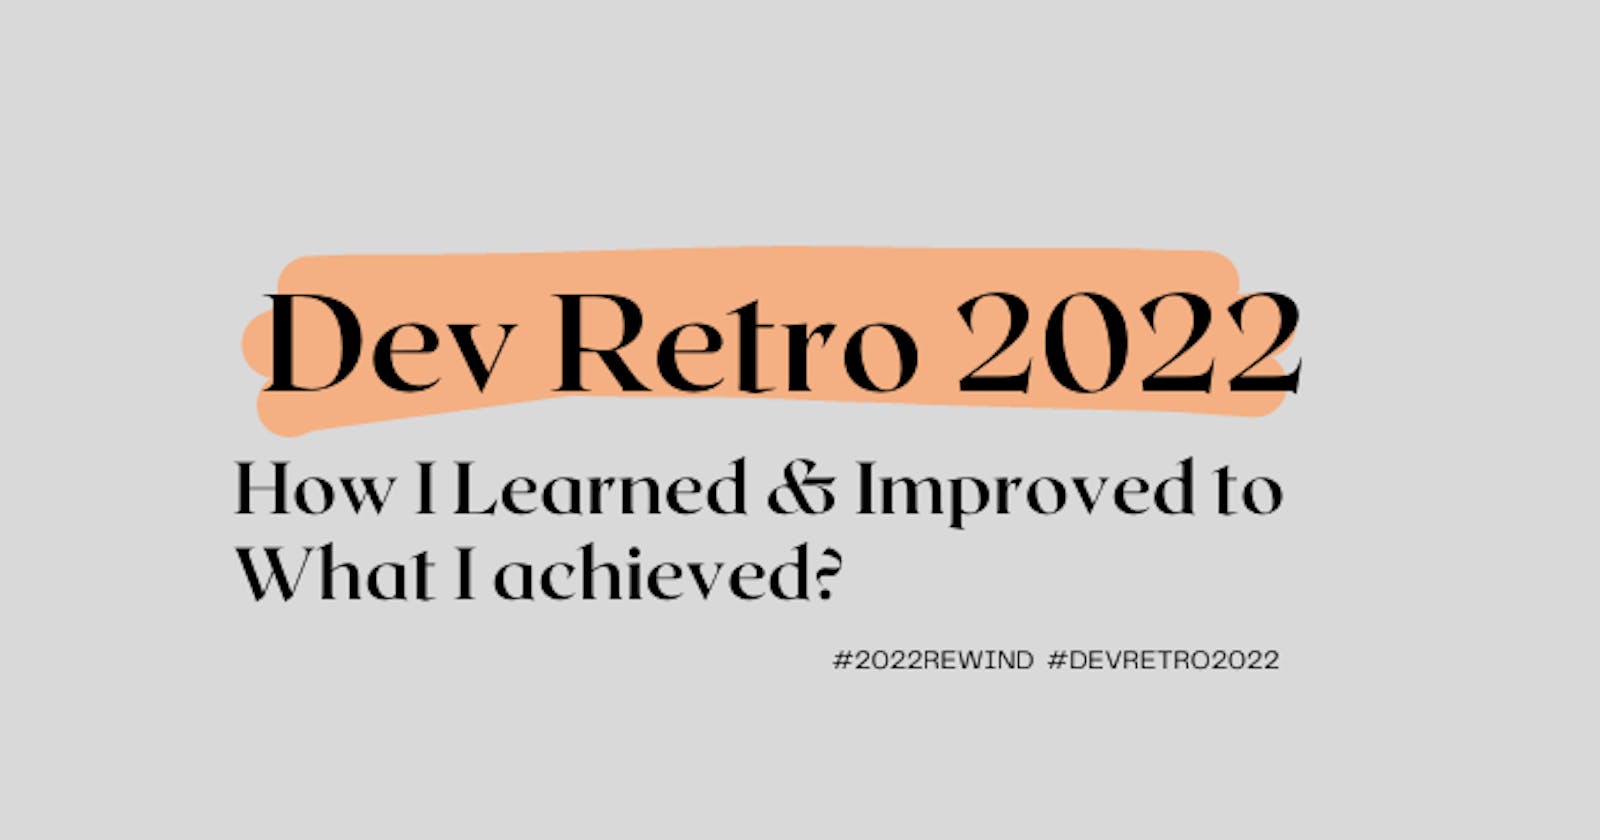 Dev Retro 2022: How I Learned & Improved to What I achieved?